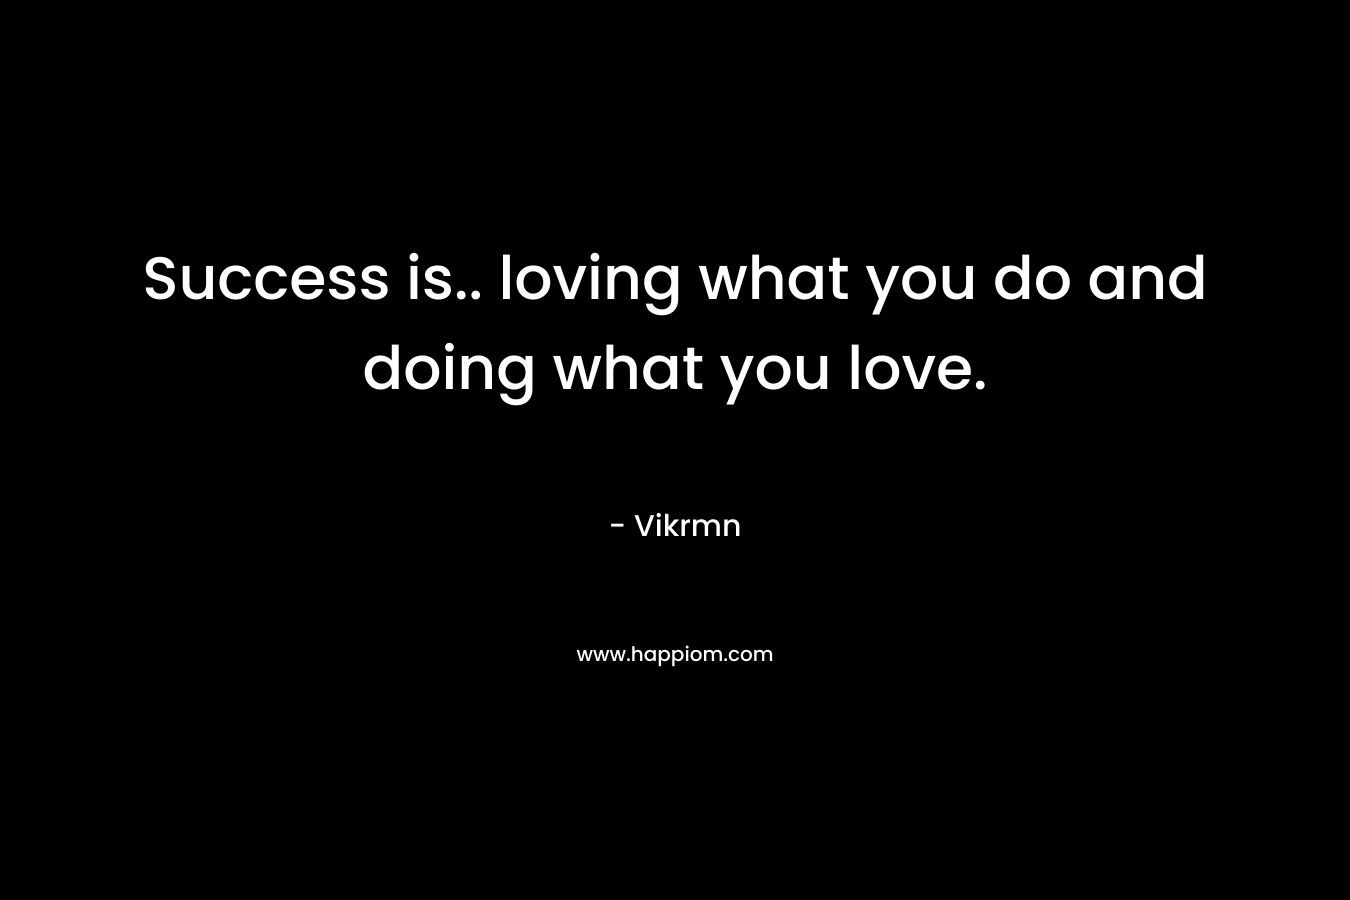 Success is.. loving what you do and doing what you love.